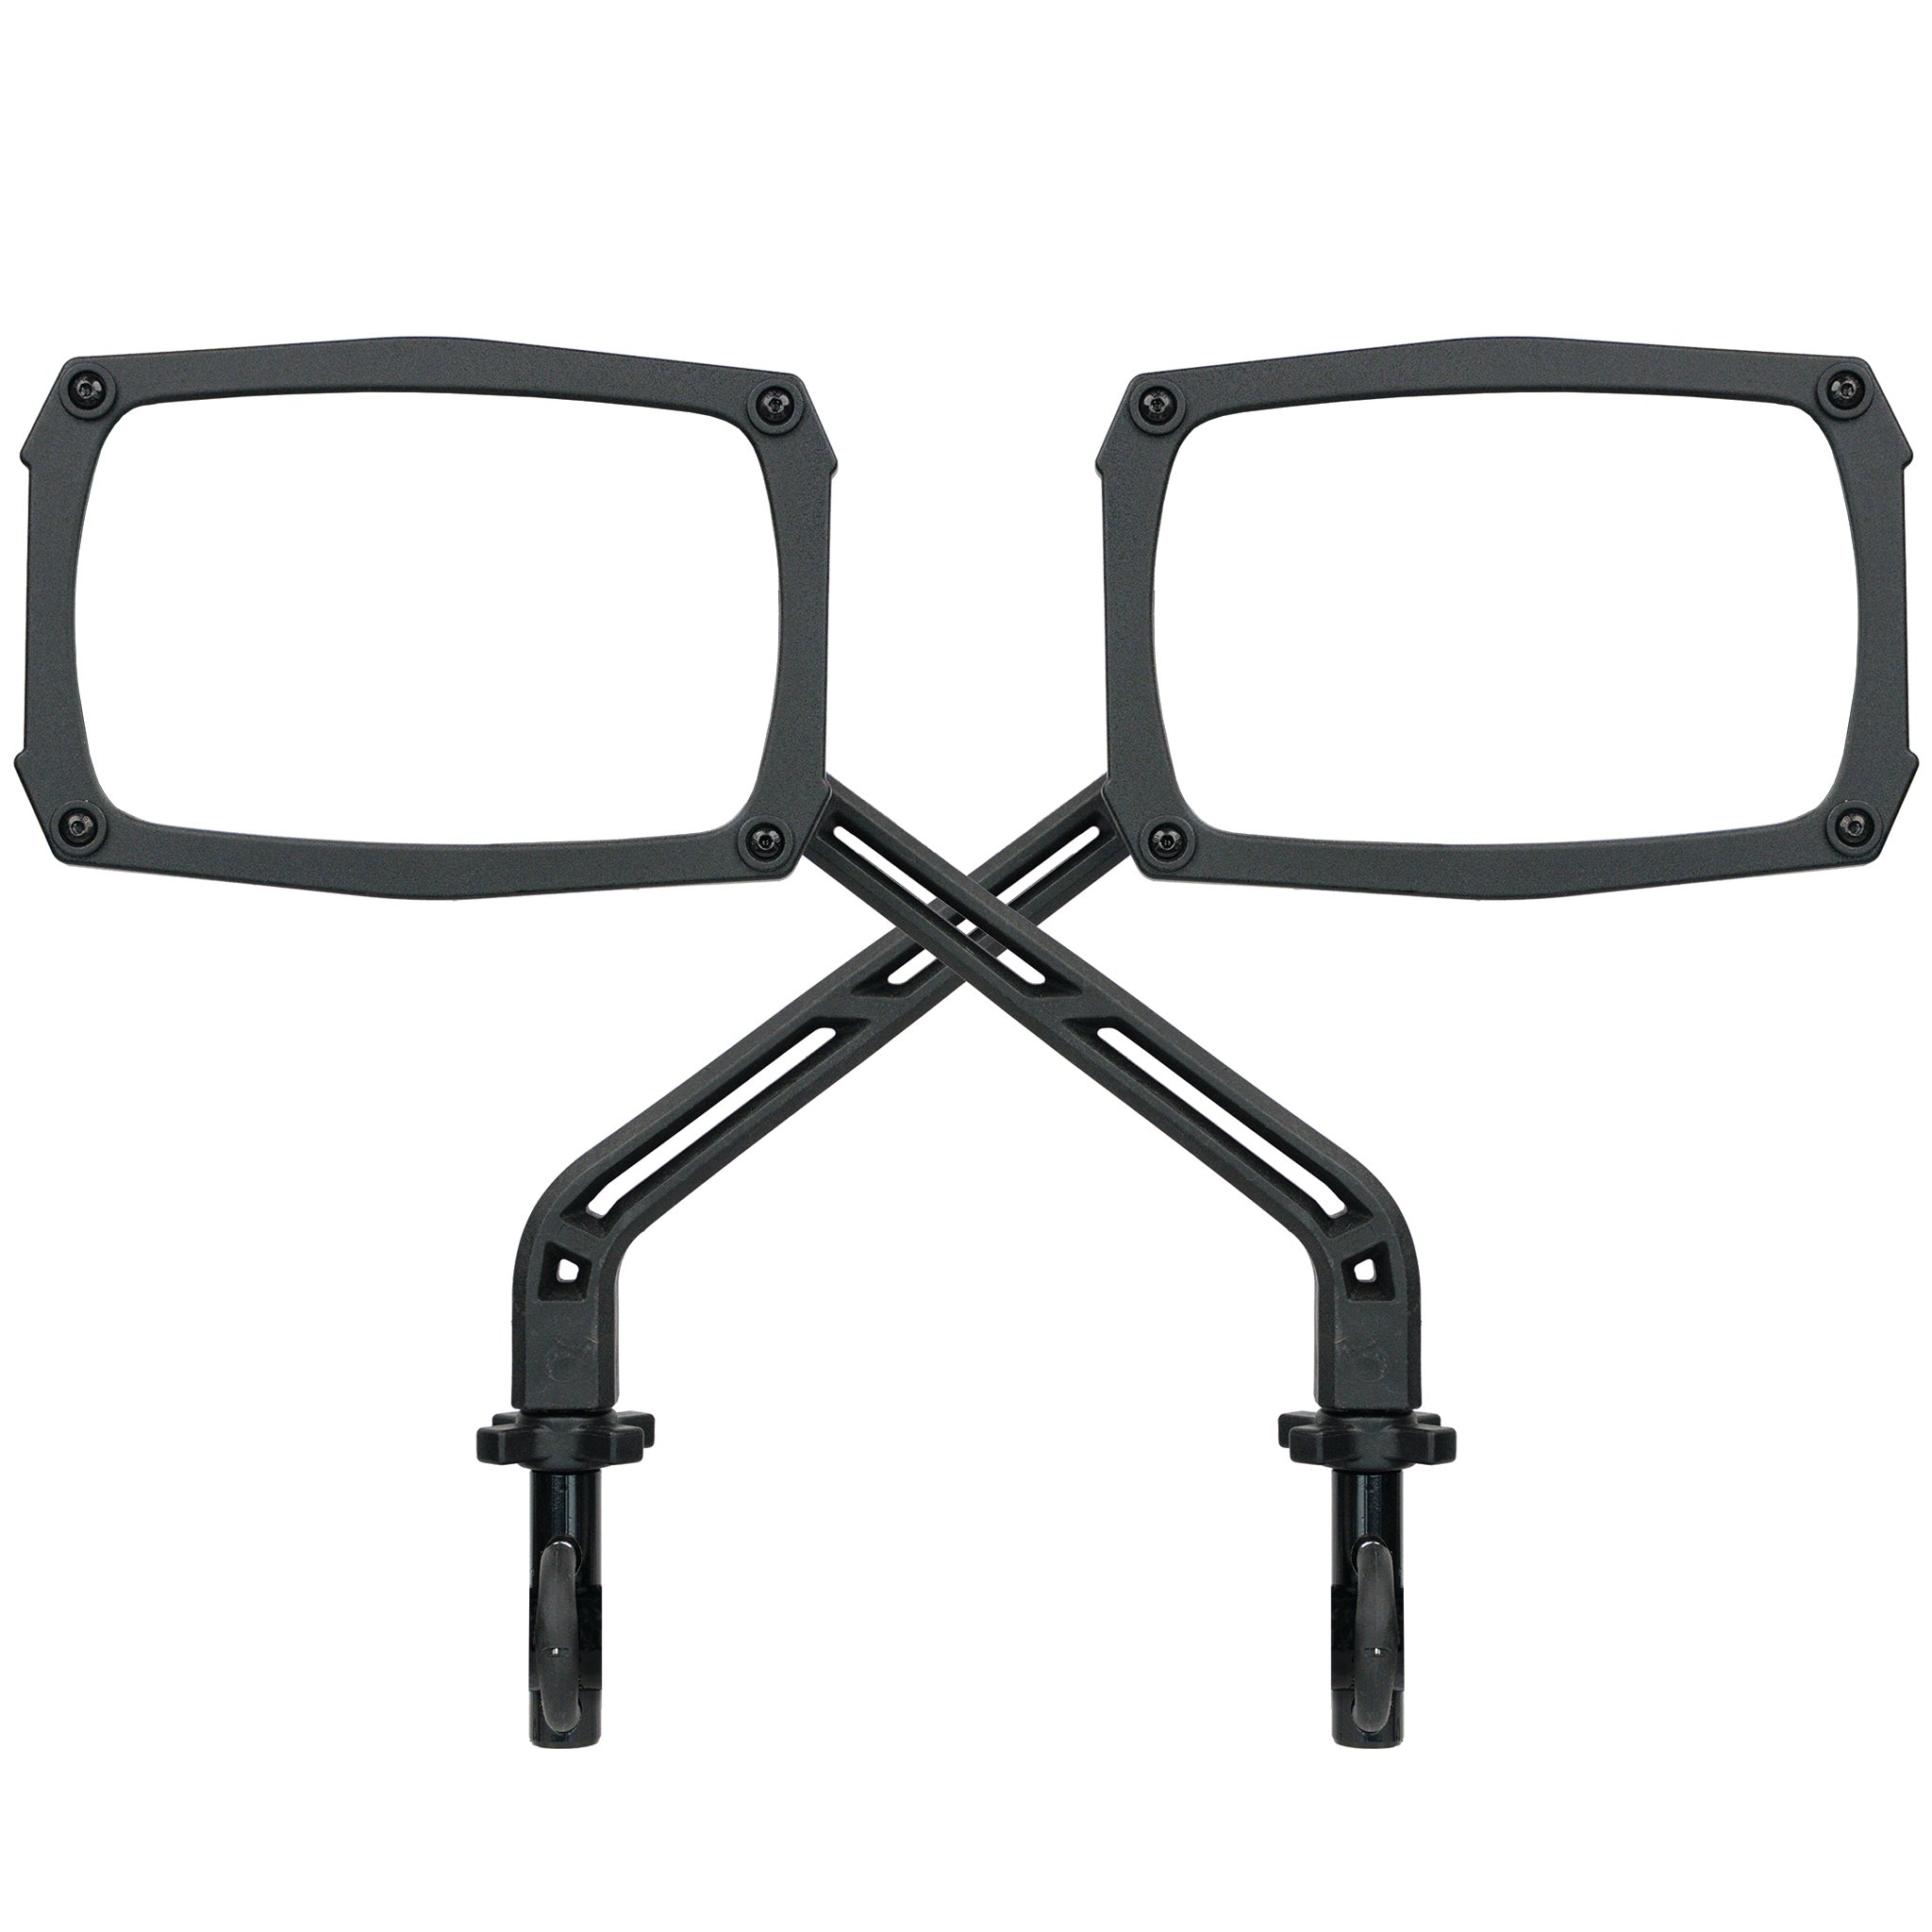 CLEARVIEW™ ATV MIRROR - 2 PACK